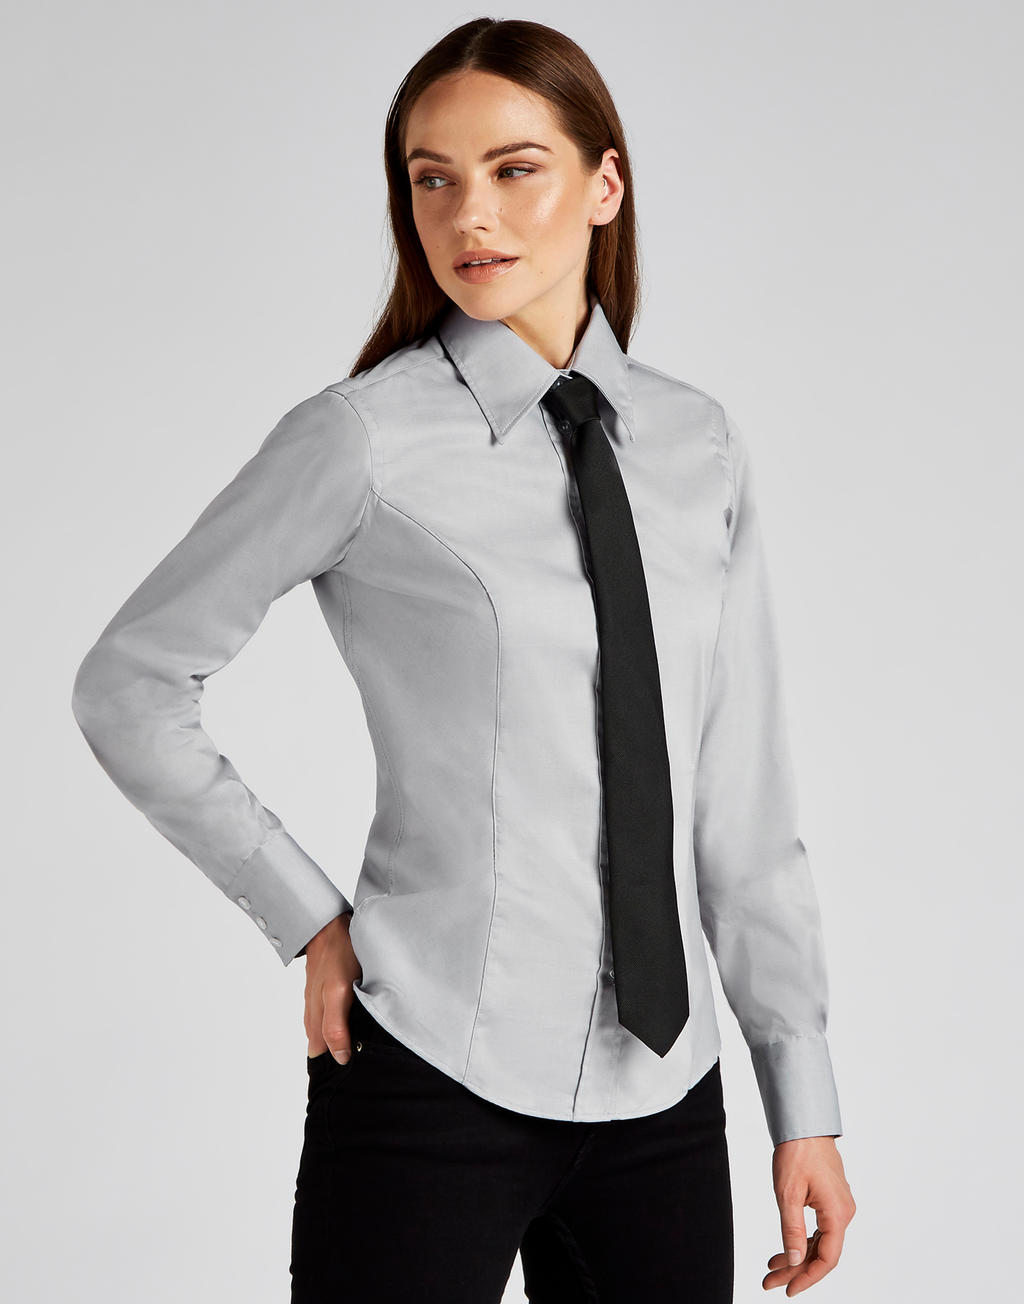  Womens Tailored Fit Premium Oxford Shirt in Farbe White